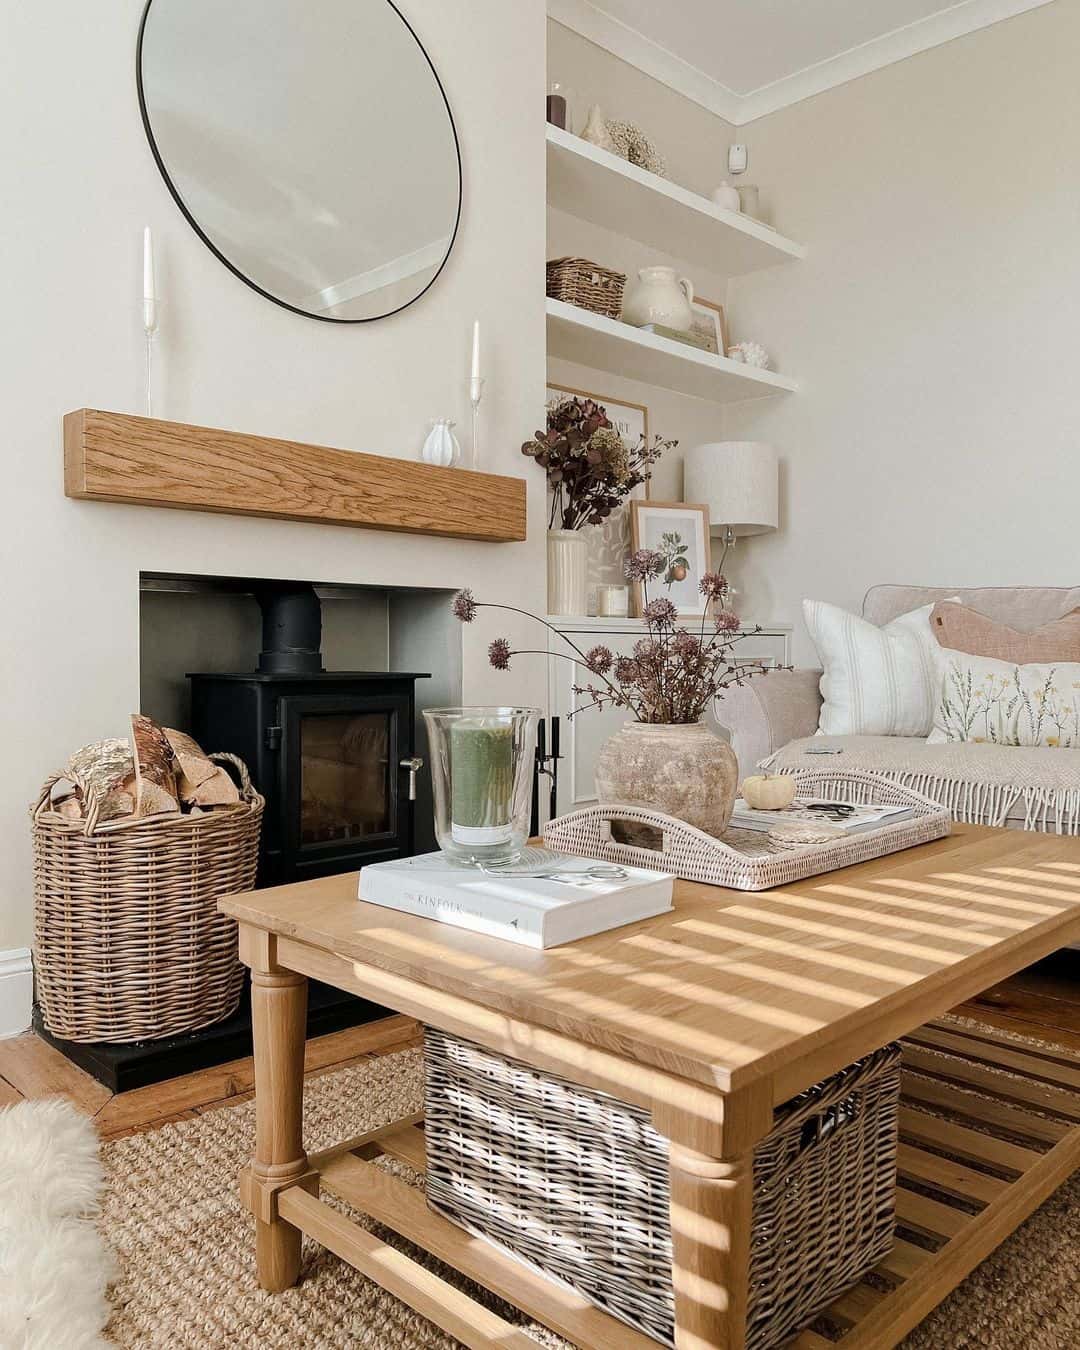 Cozy Up Your Farmhouse Living Area with Wicker Firewood Bins